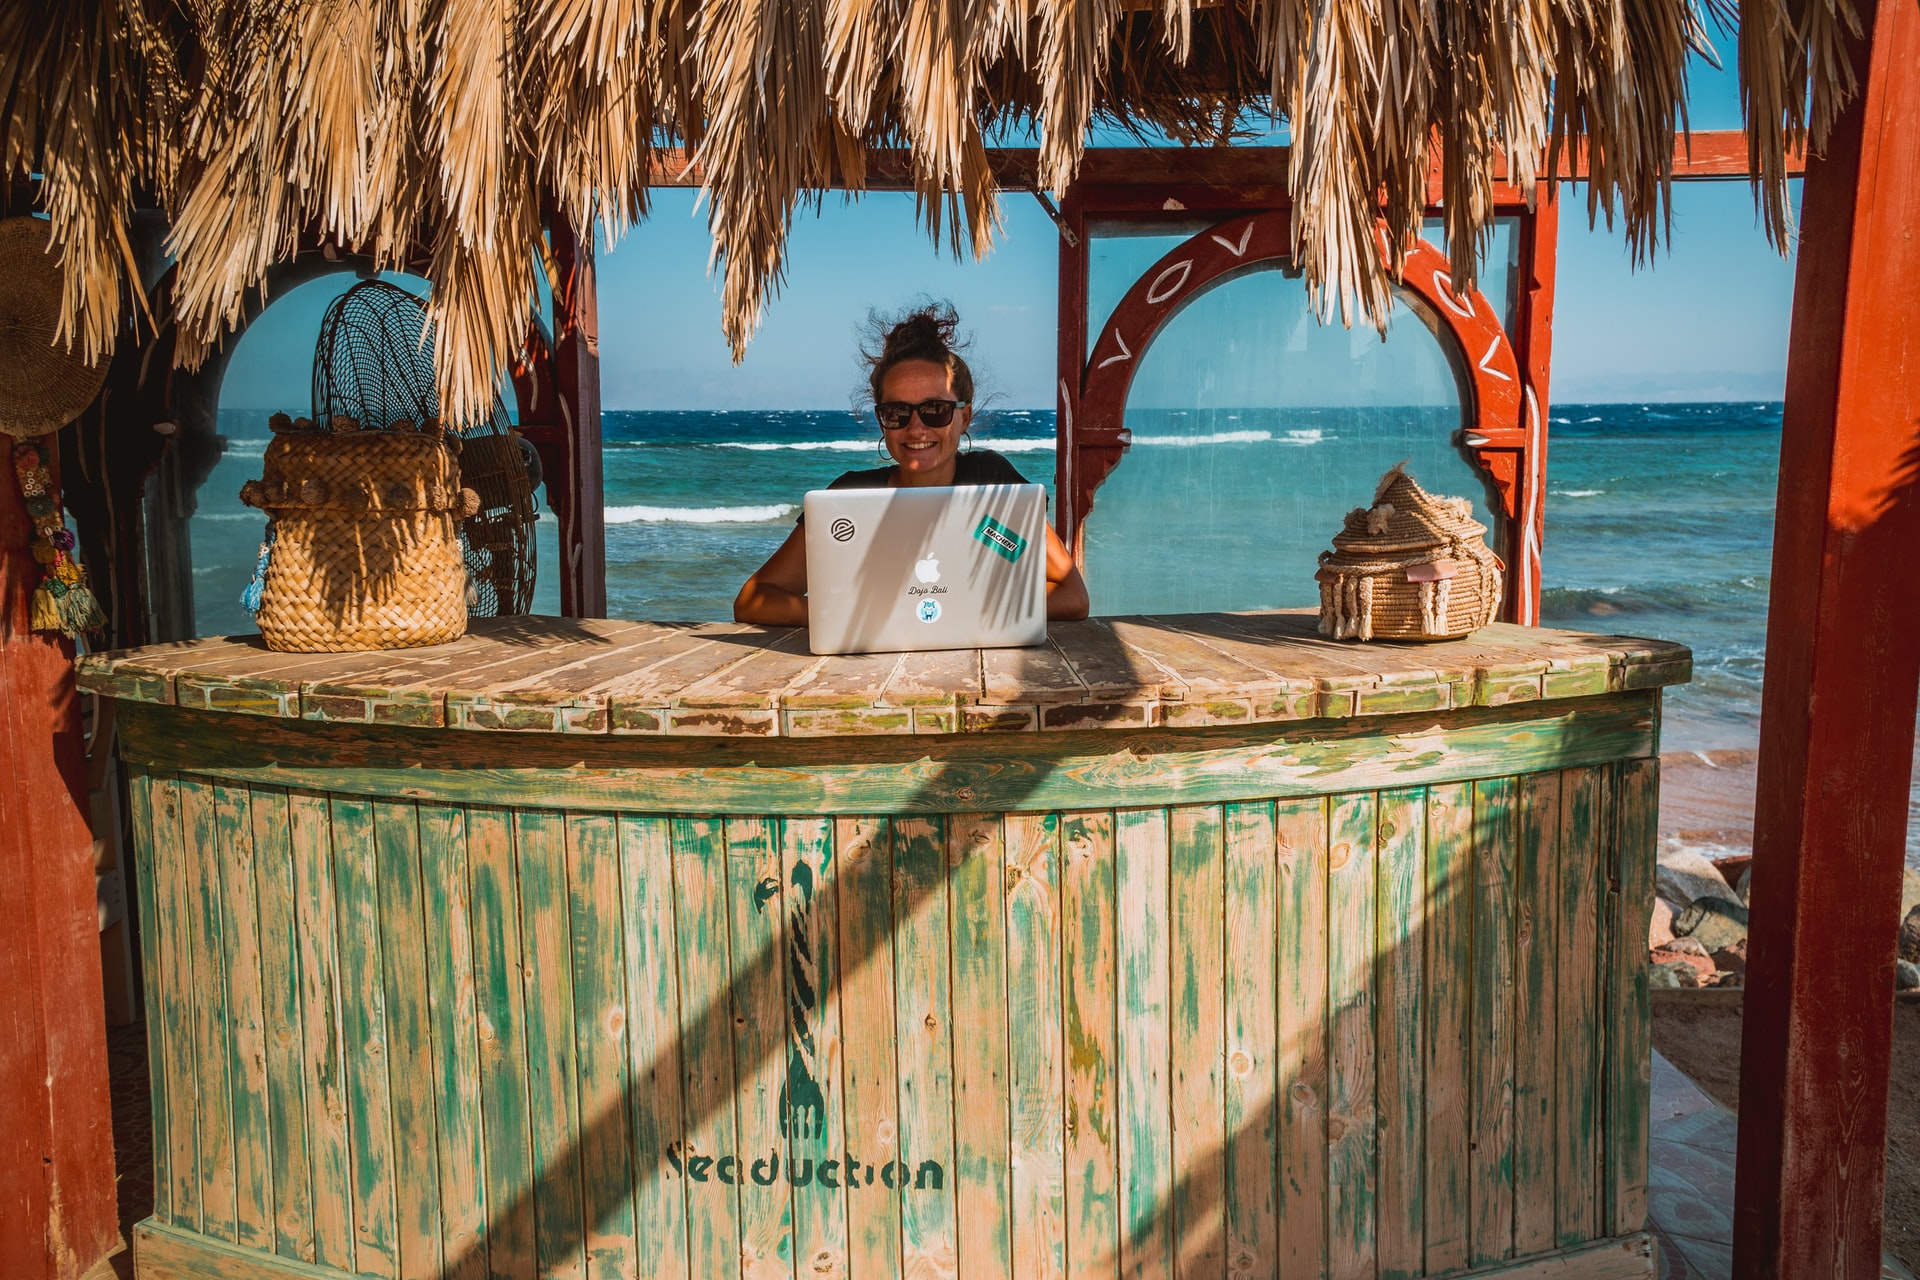 The 8 Best Digital Nomad Jobs In 2022